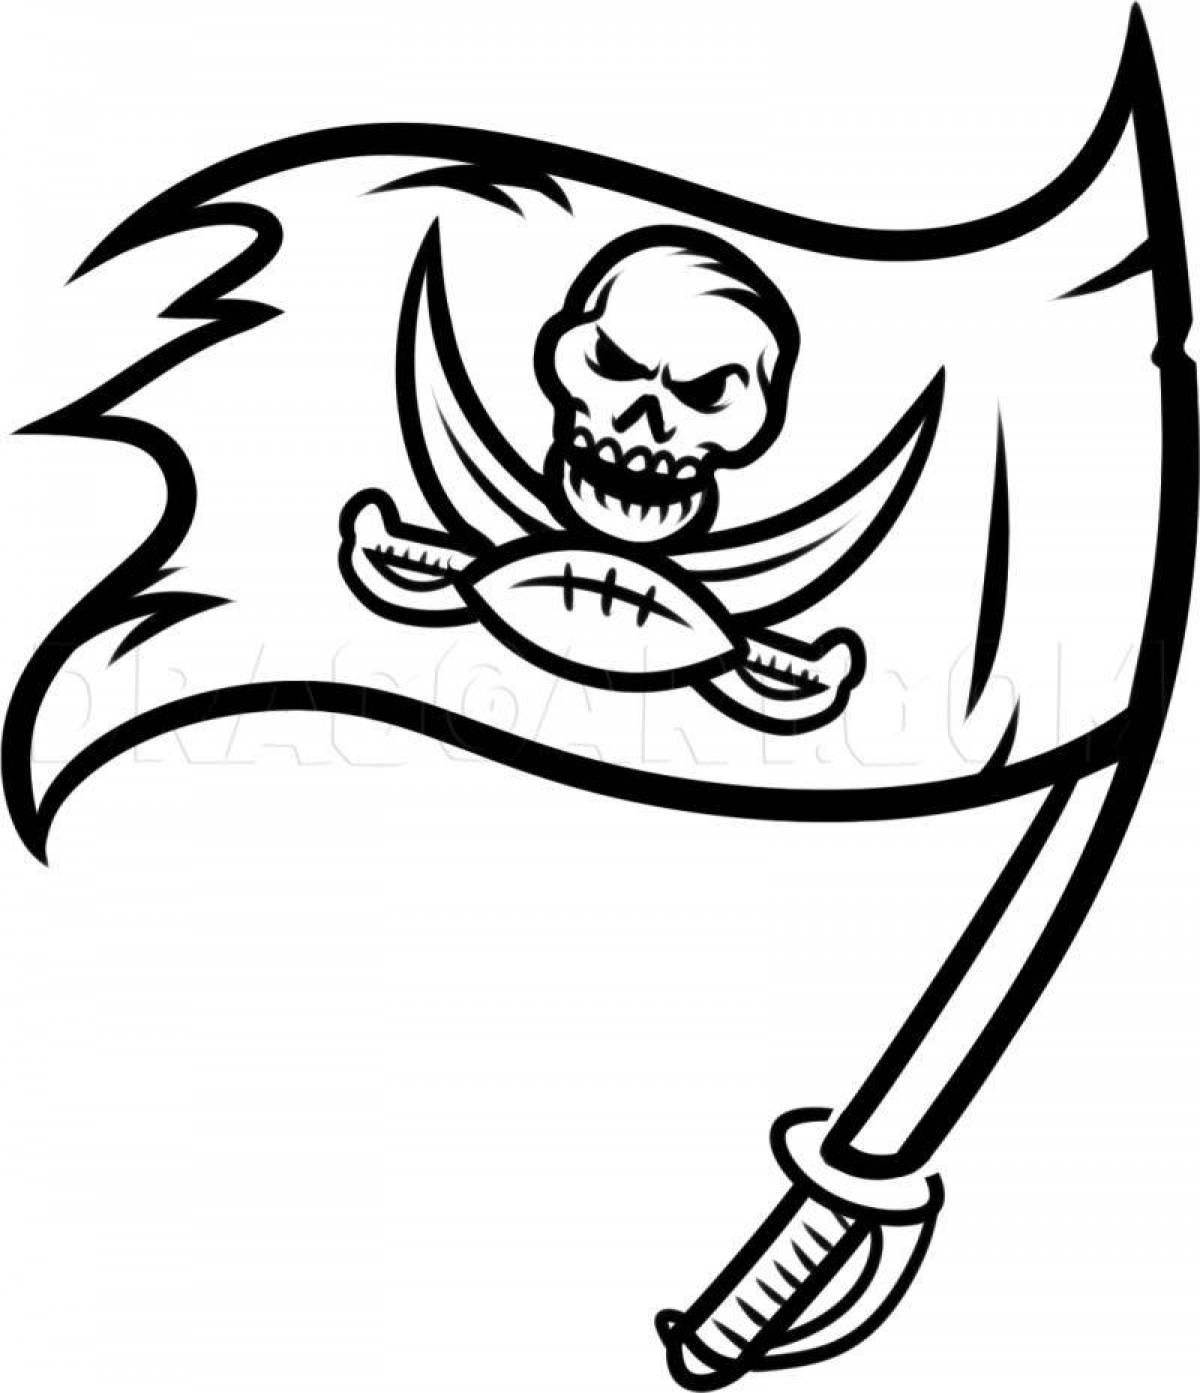 Coloring page jolly roger - grandiose